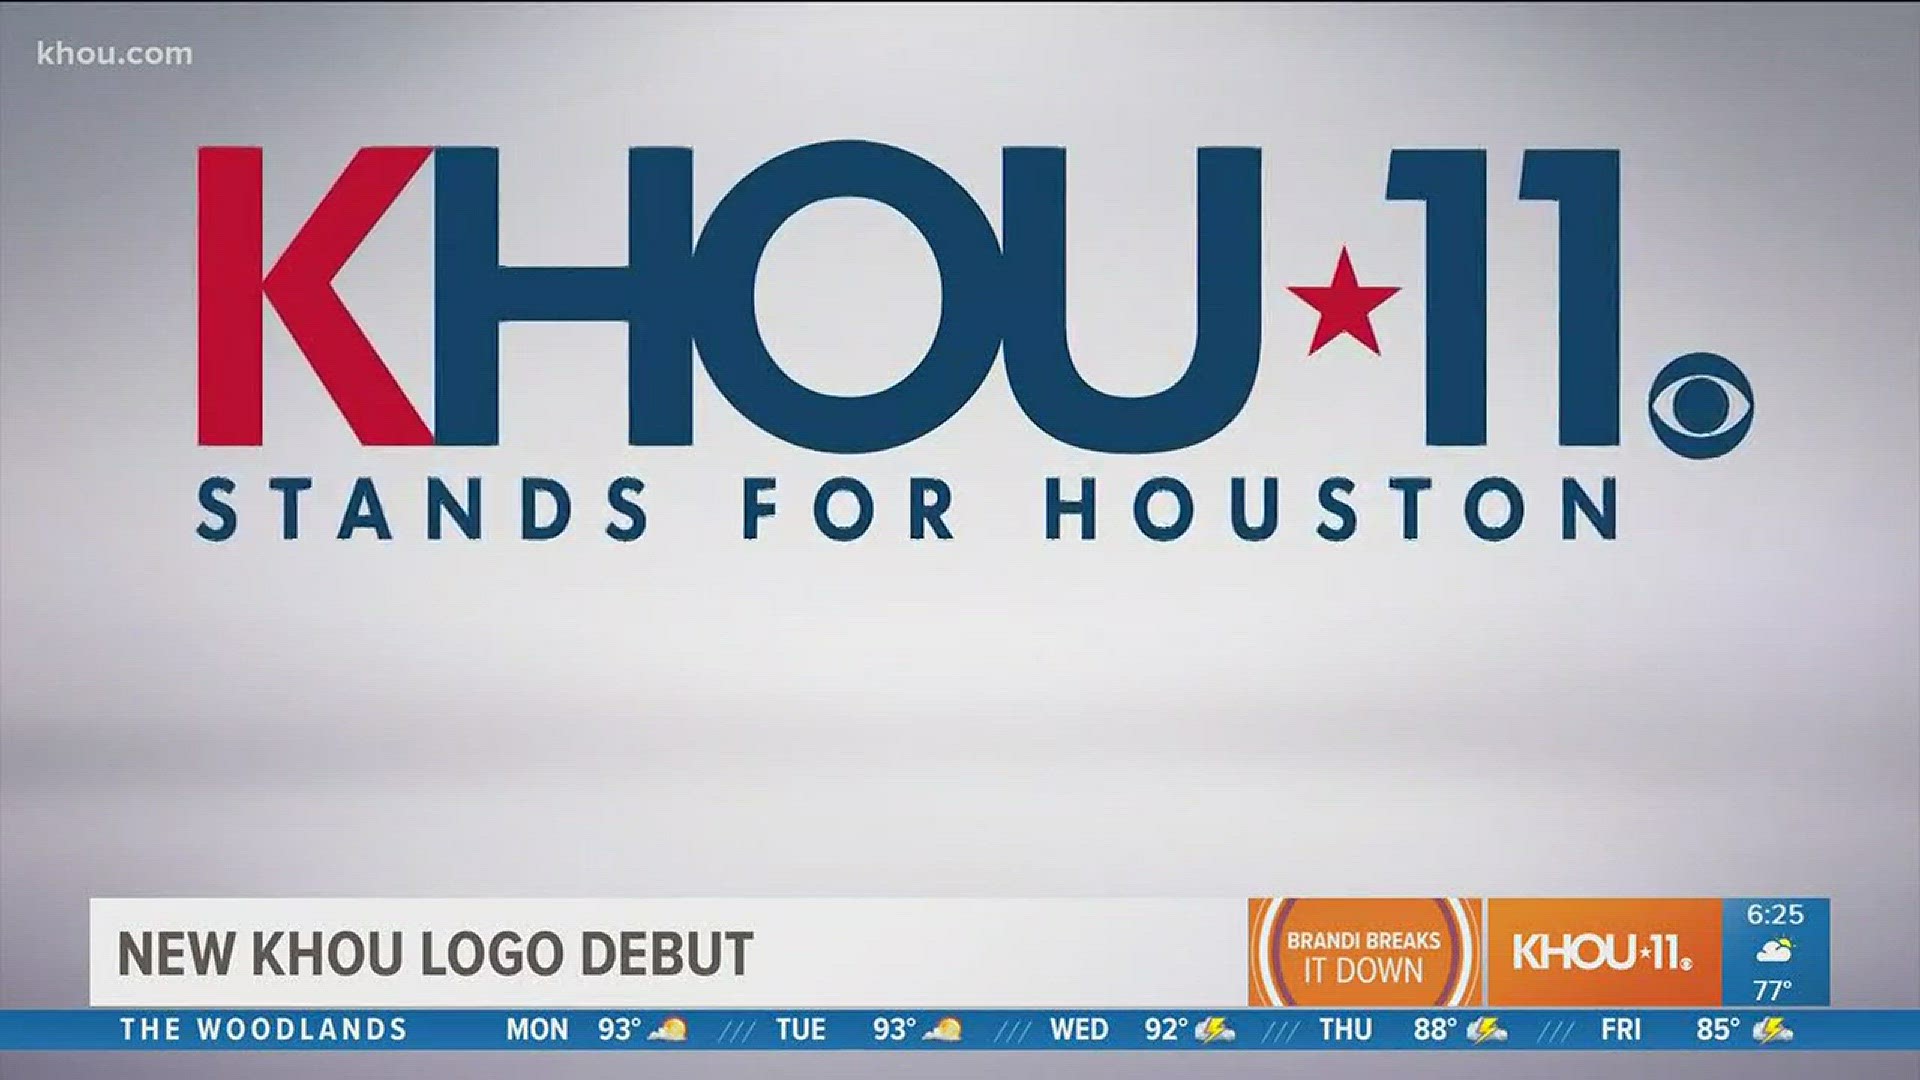 KHOU is trying something new, a little more sleek and streamlined. We are changing the look of our logo and you will be able to see the new change on air, online and at our new studios.